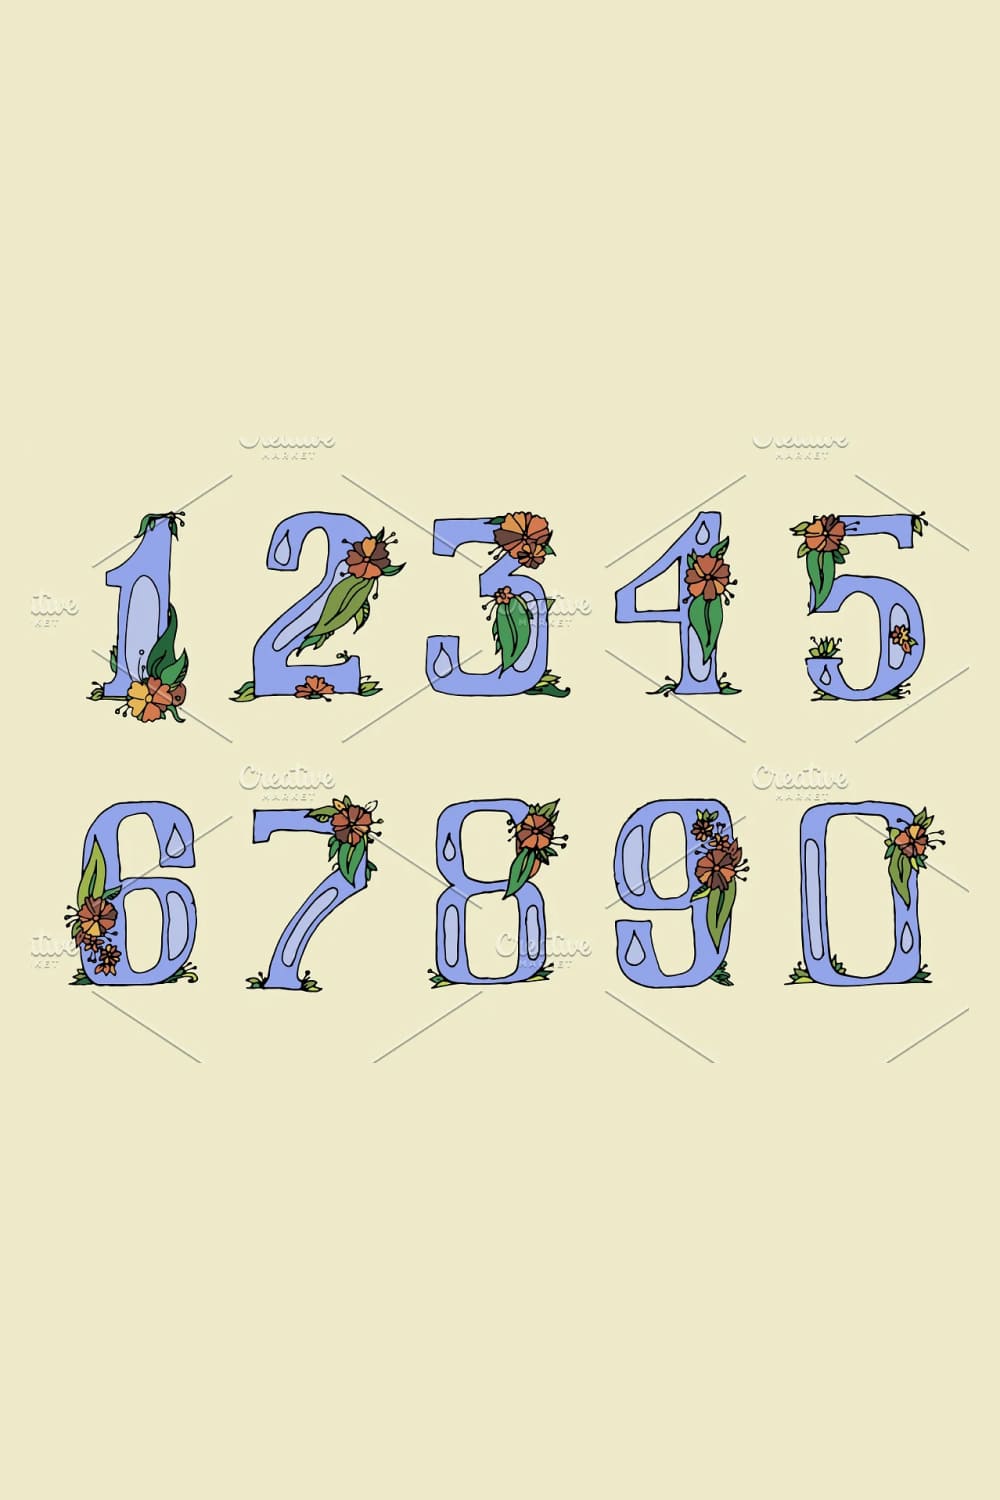 An example of a font made of numbers with colors in them.